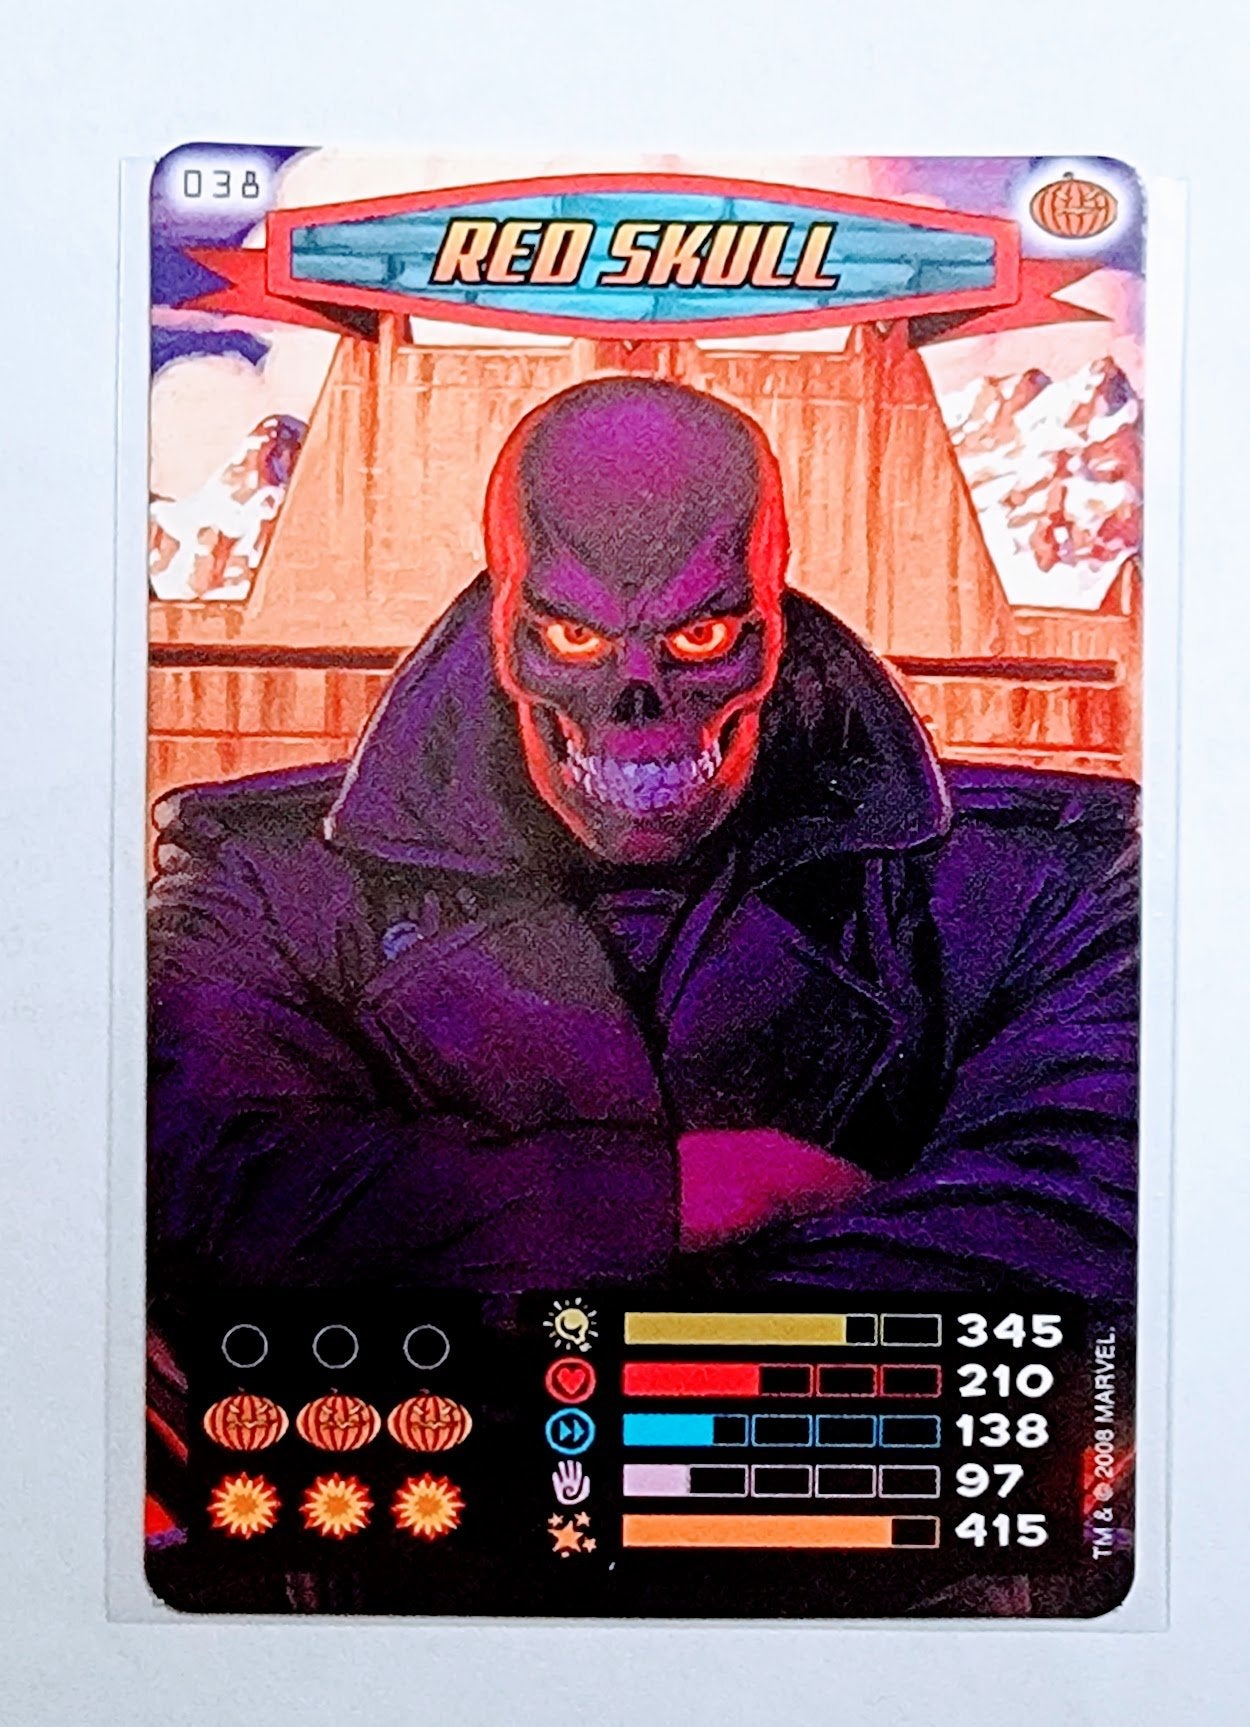 2008 Spiderman Heroes and Villains Red Skull #38 Marvel Booster Trading Card UPTI simple Xclusive Collectibles   